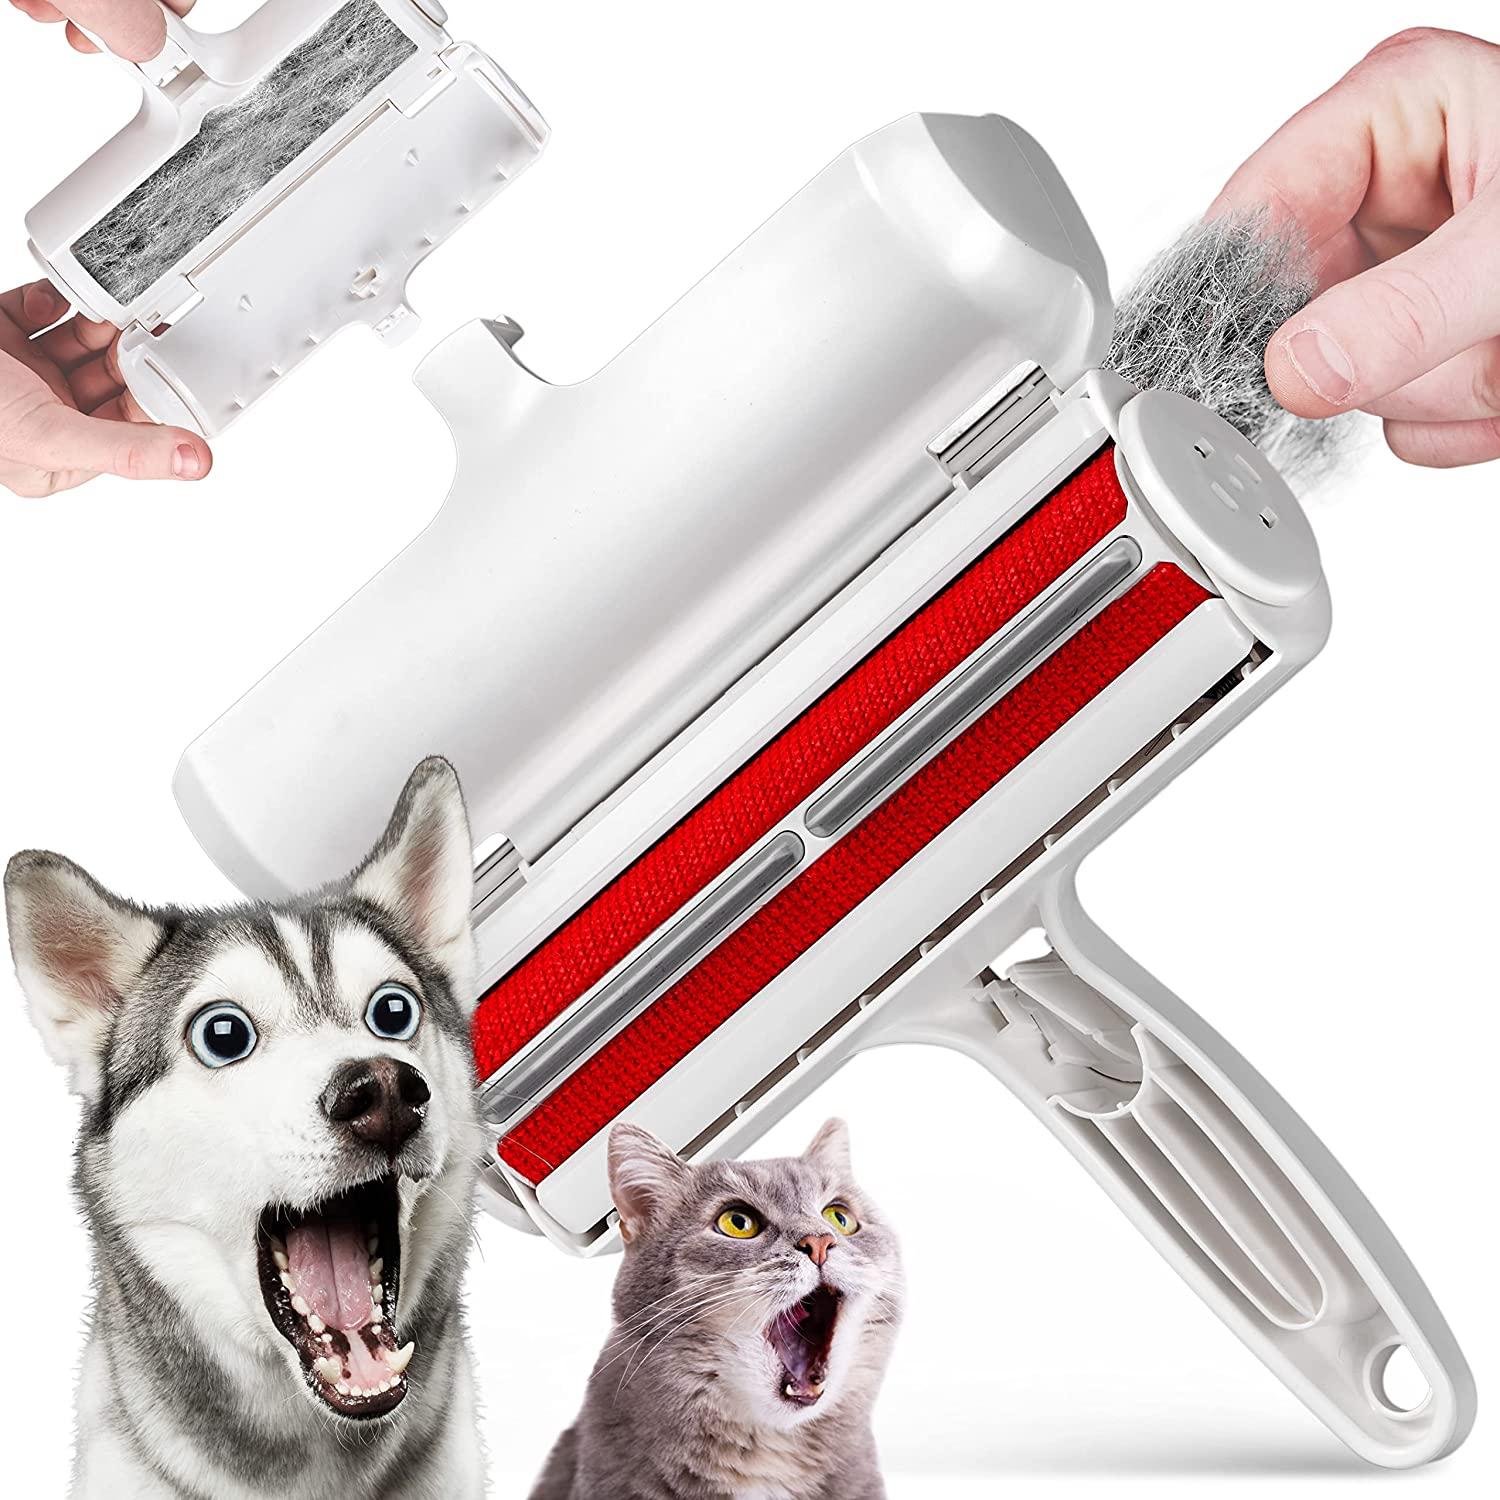 ChomChom Pet Hair Remover for $19.96